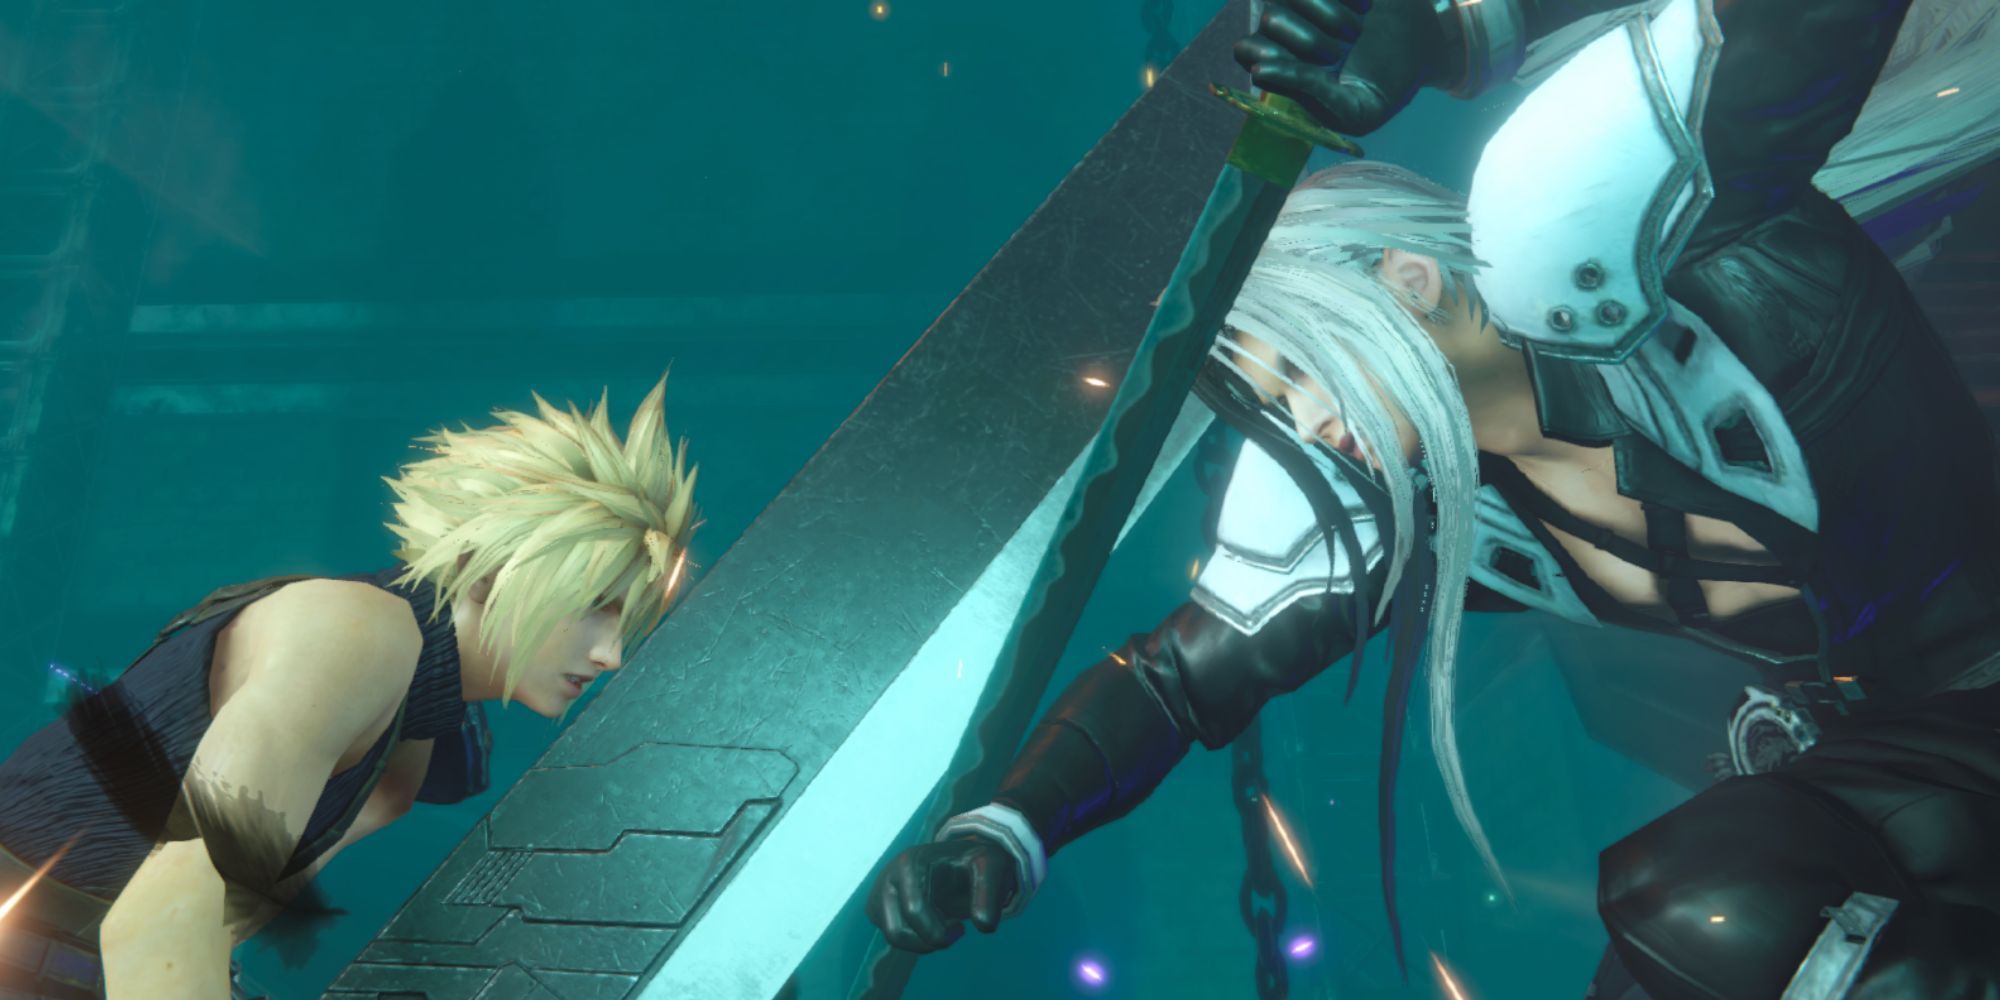 Cloud Strife and Sephiroth clashing swords as they fight at the beginning of Final Fantasy 7 Ever Crisis